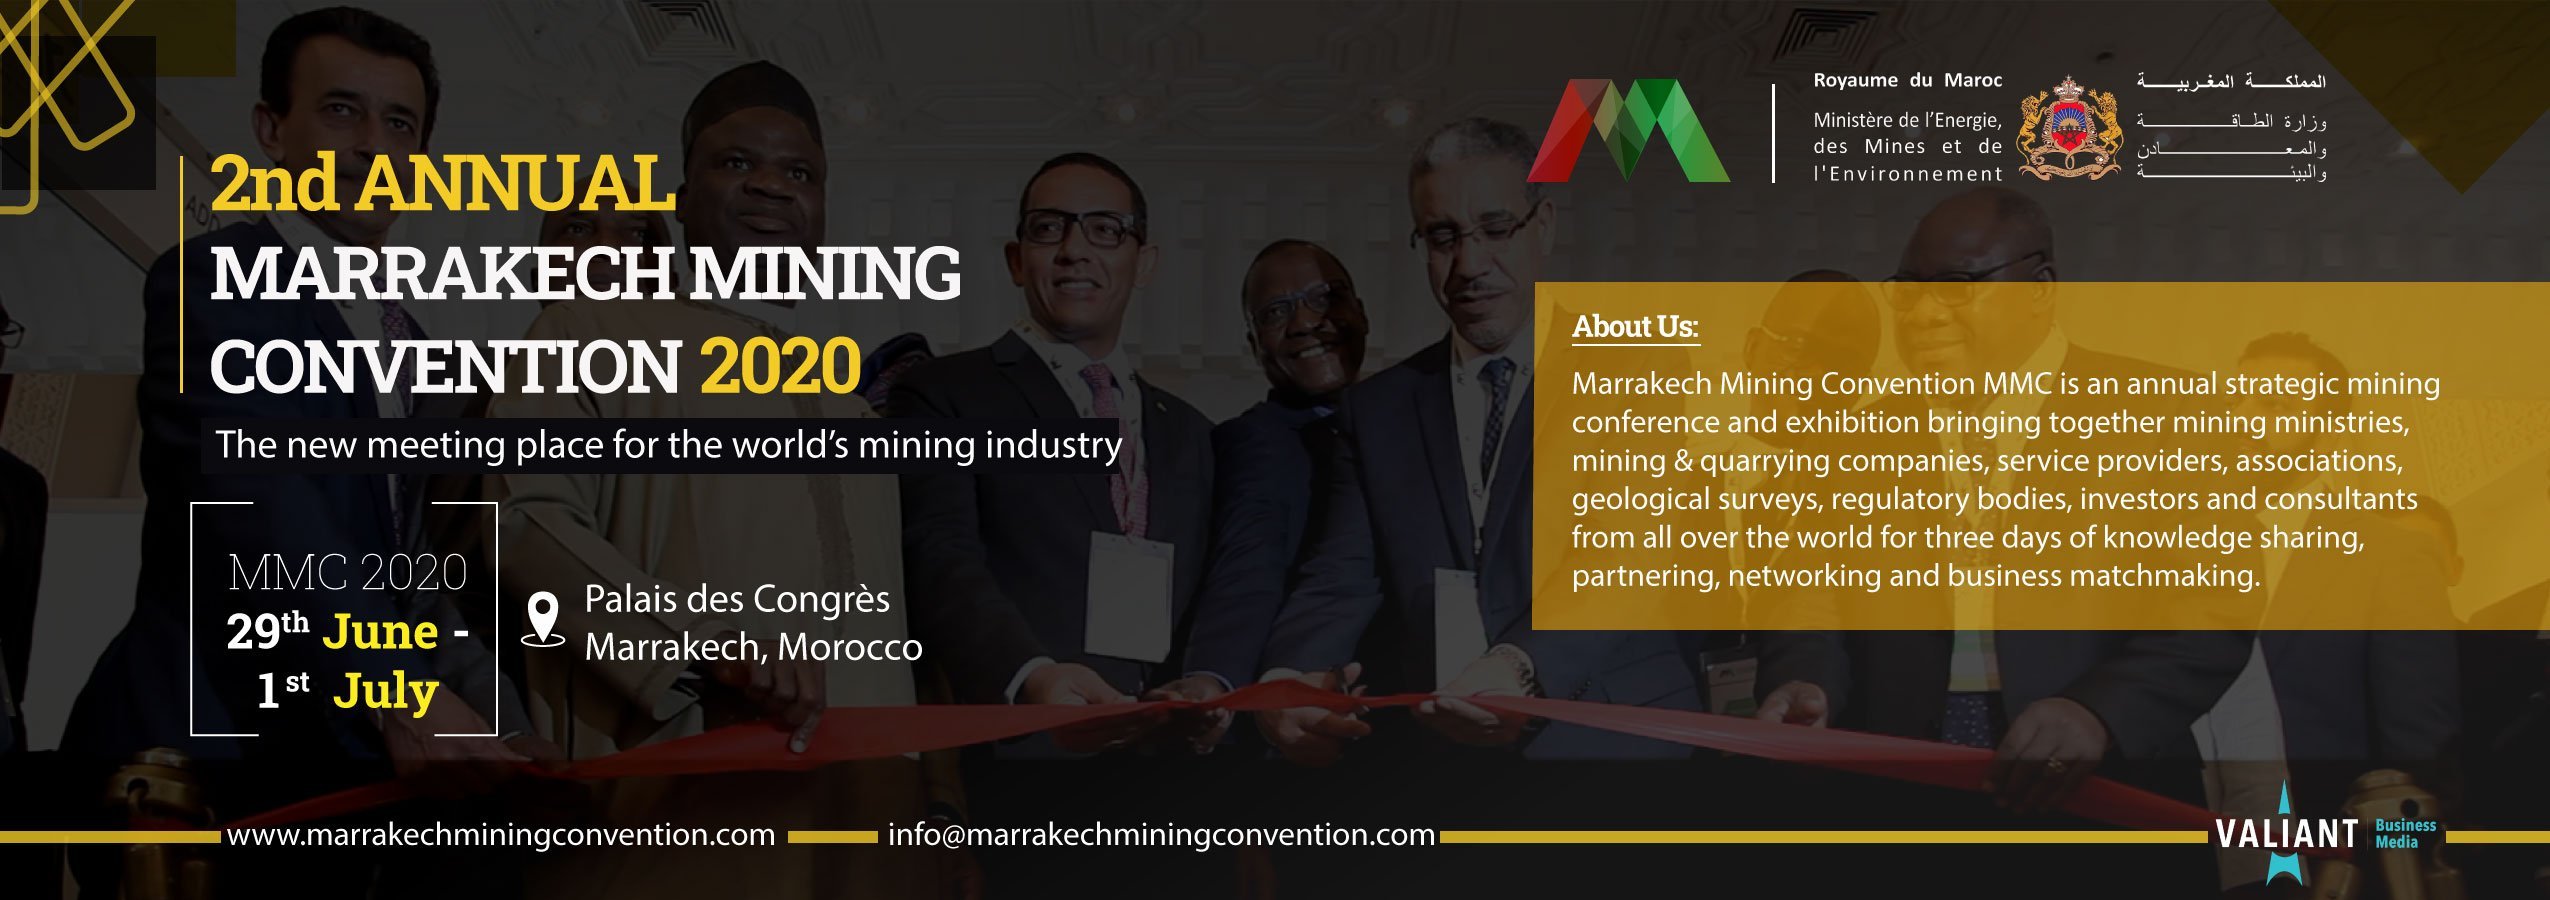 2nd ANNUAL MARRAKECH MINING CONVENTION